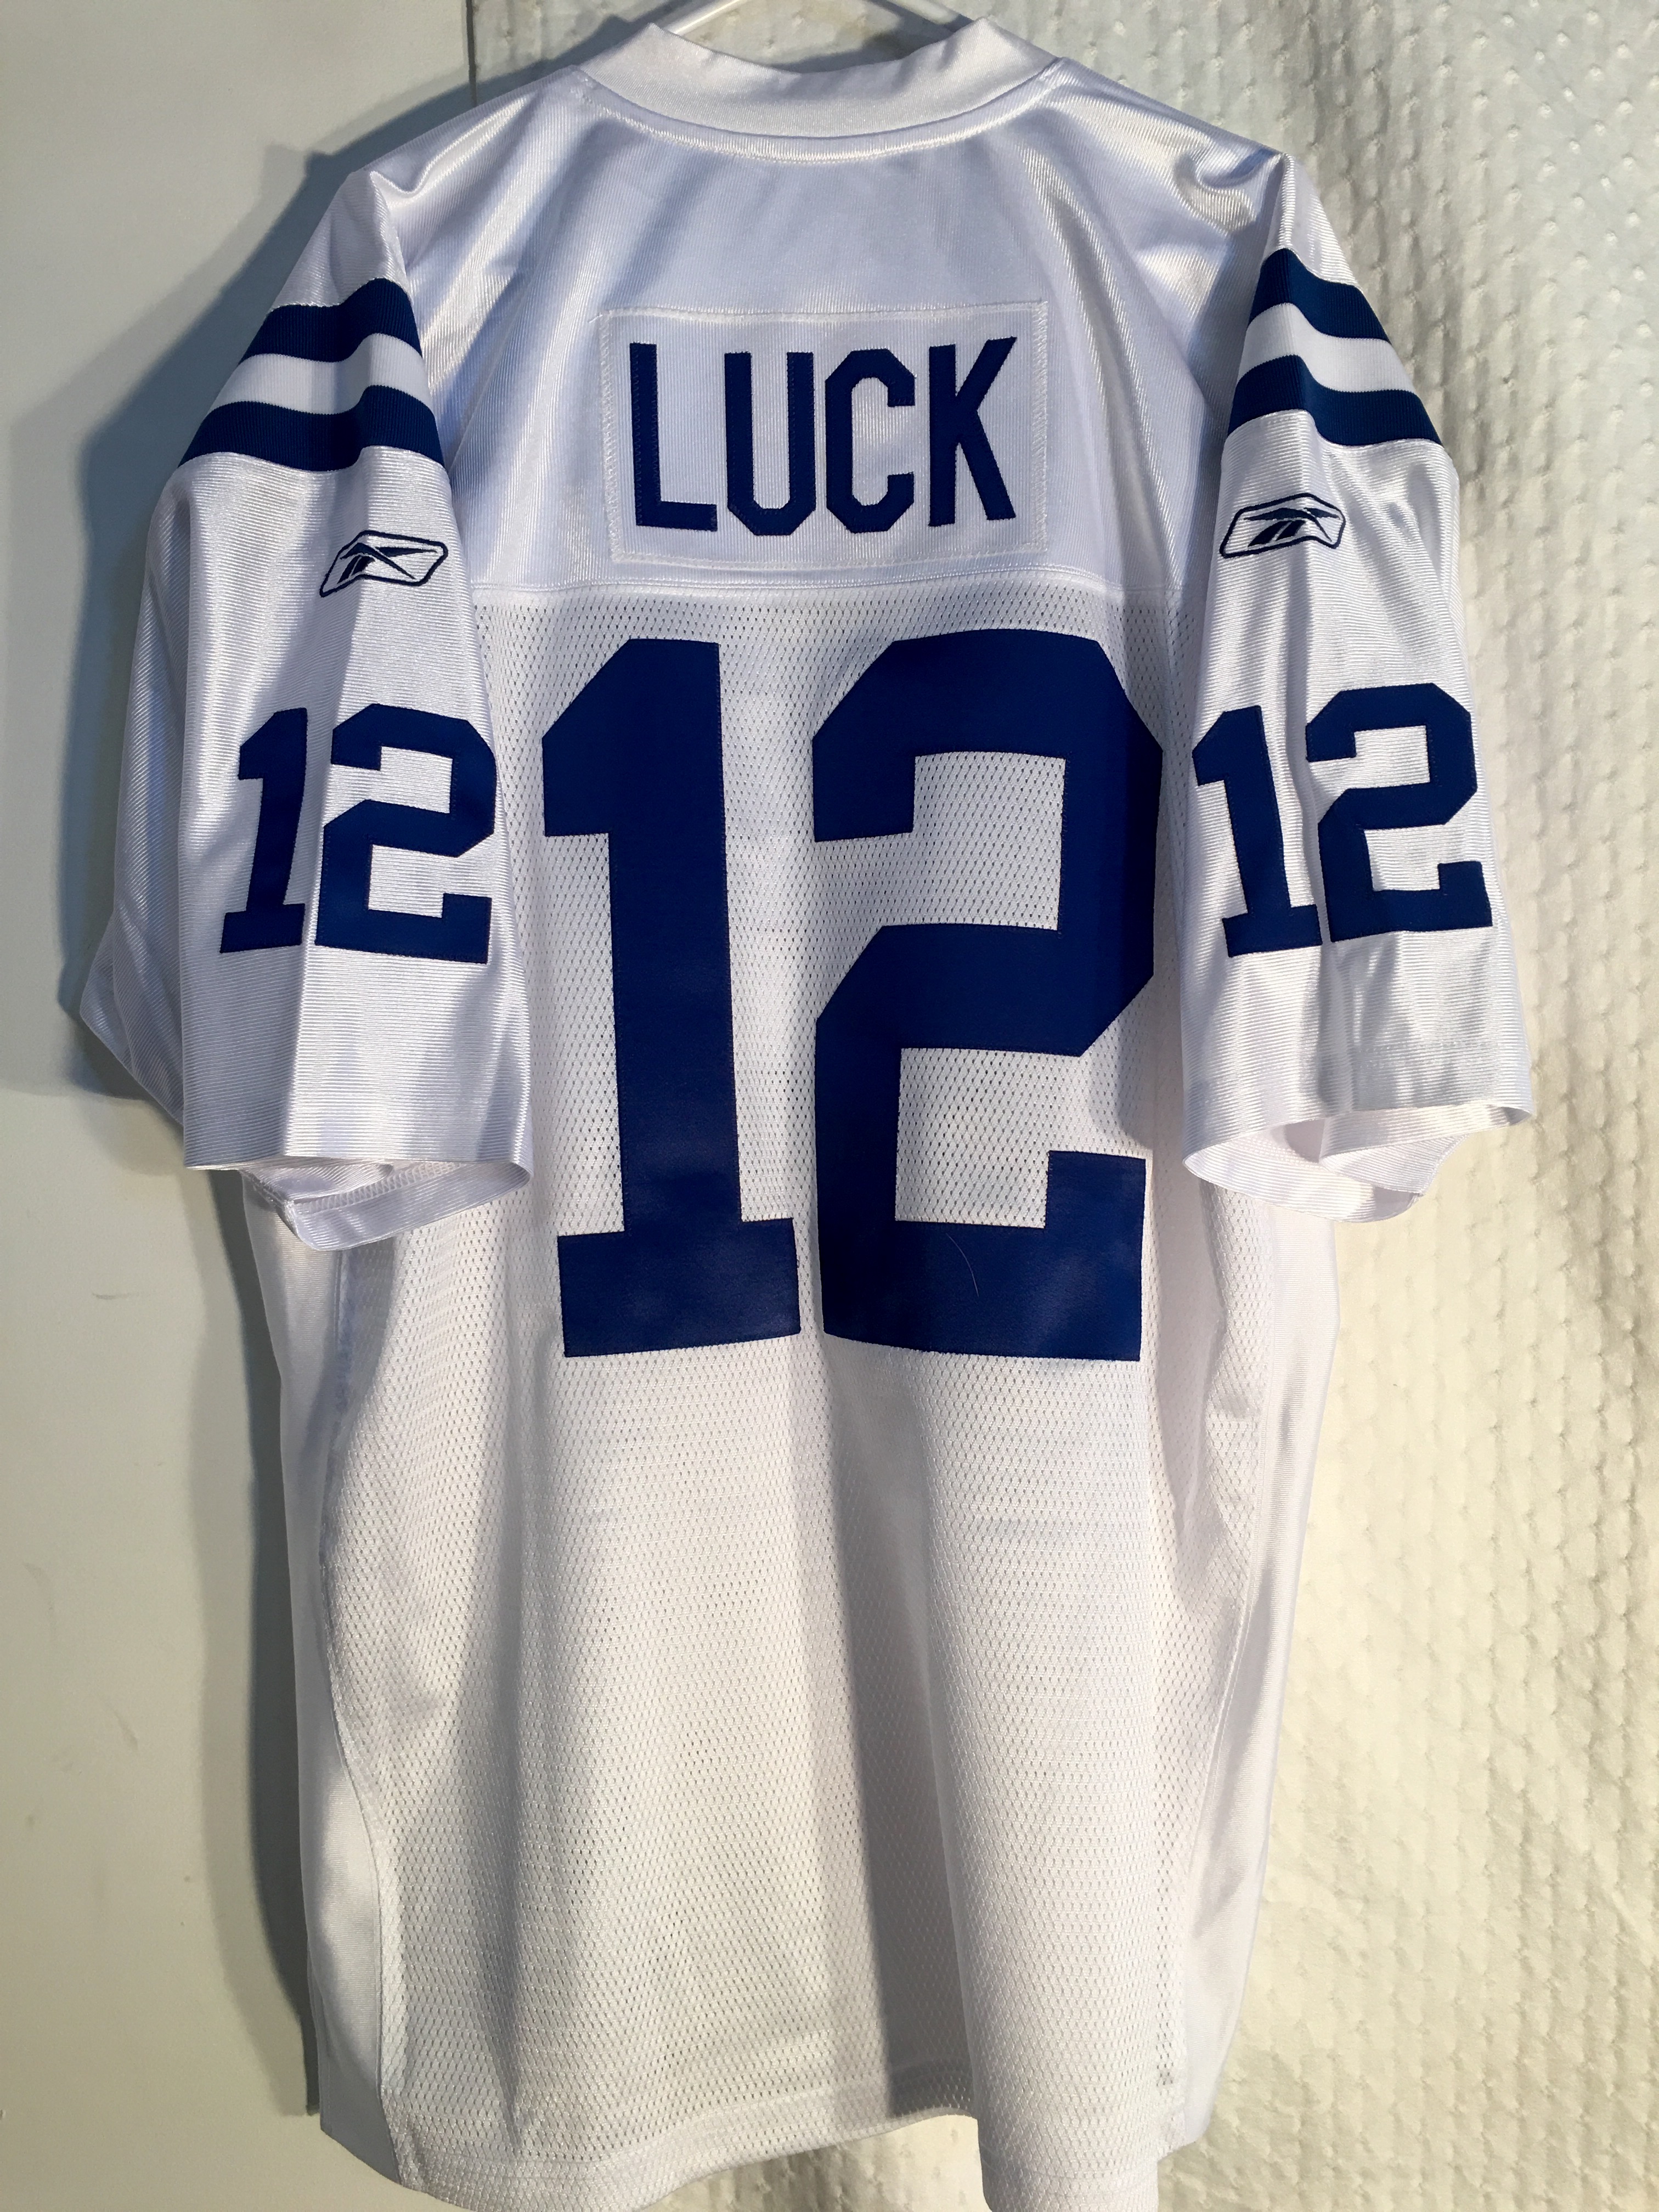 Details about Reebok Authentic NFL Jersey Indianapolis Colts Andrew Luck White sz 54